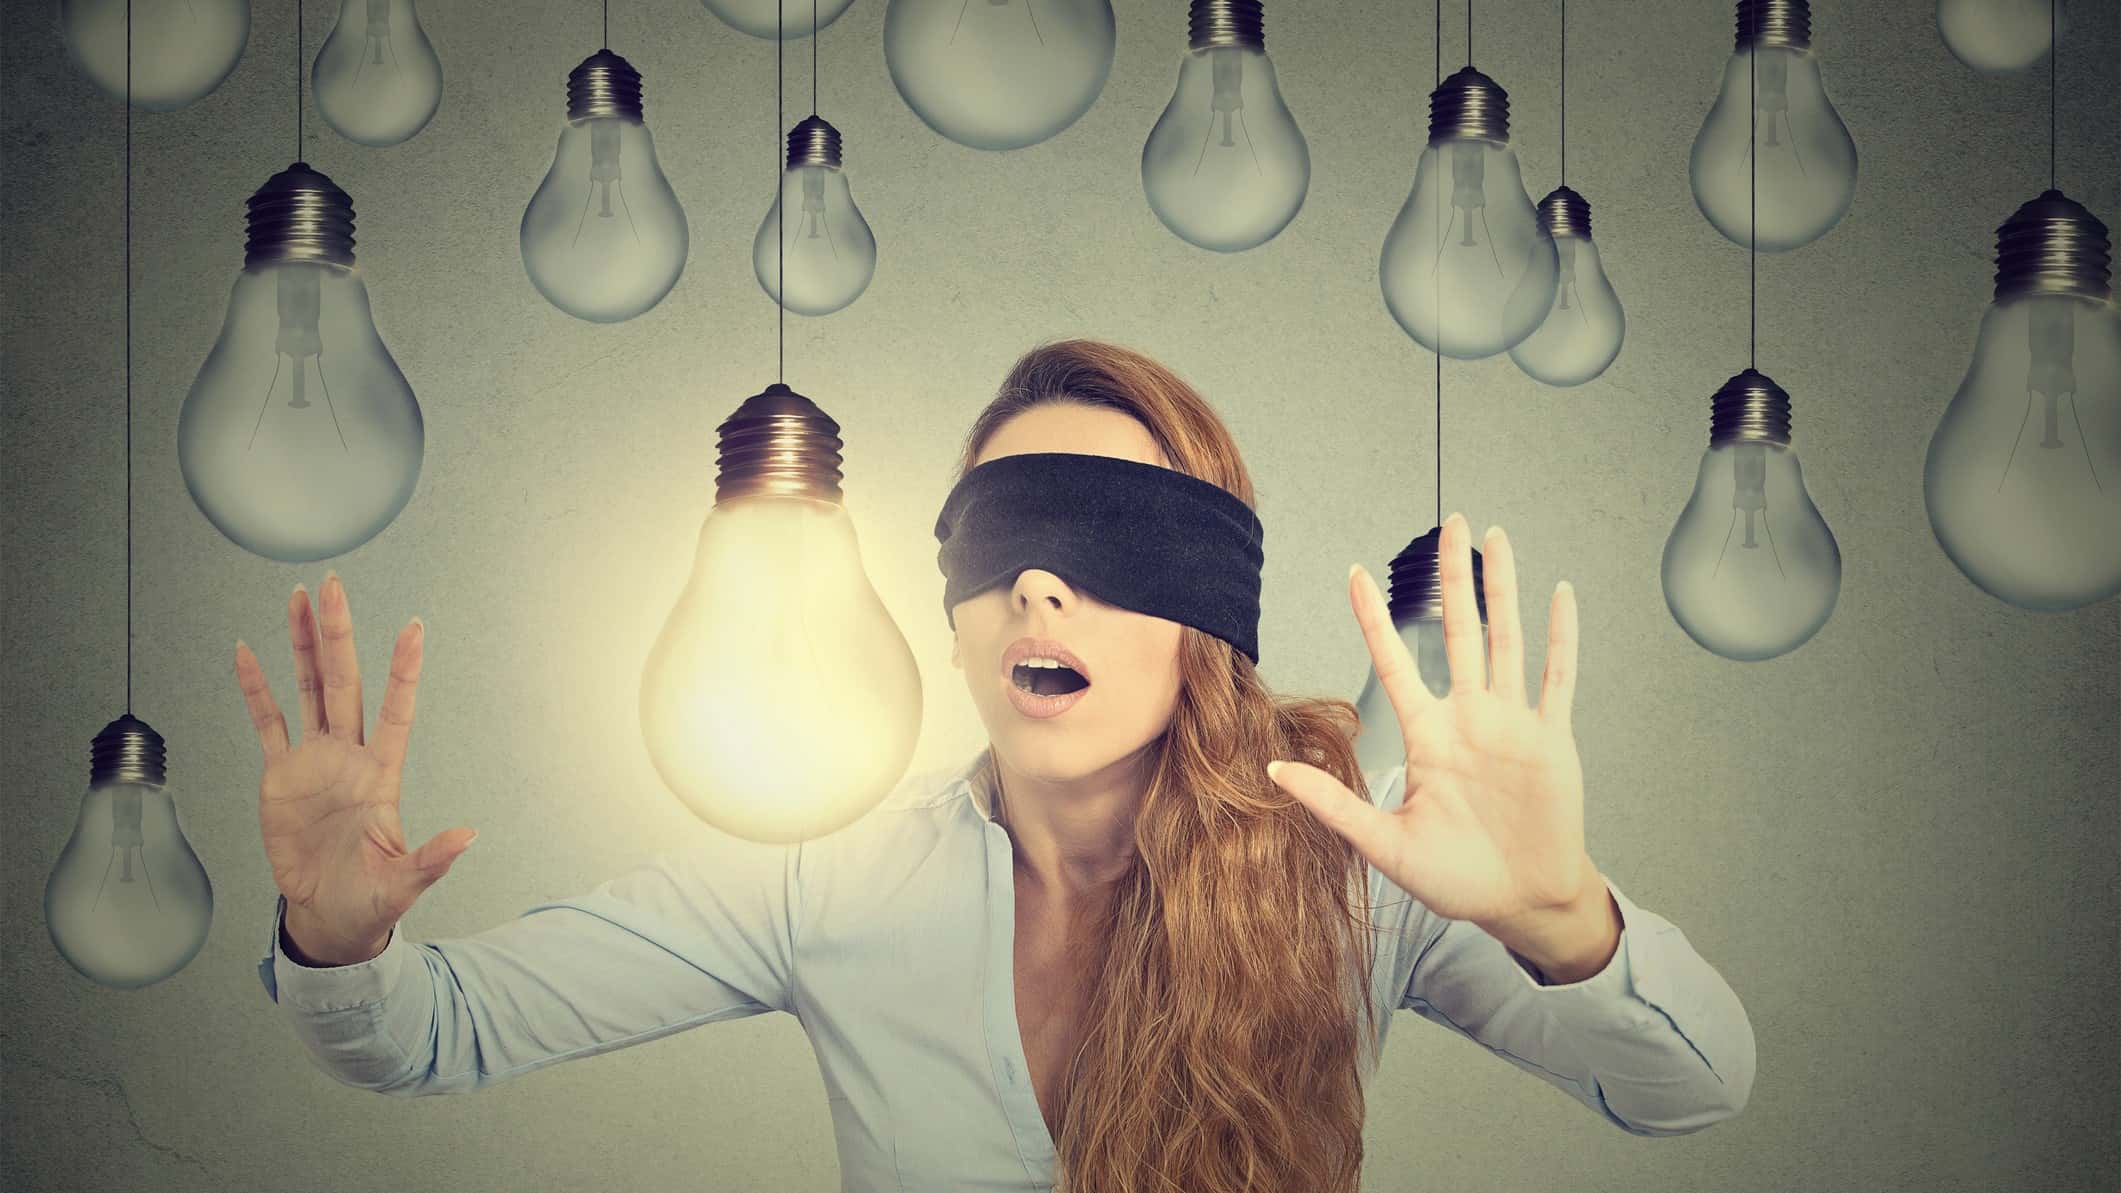 A young woman blindfolded holds her hands up as if feeling her way with the graphic of a lit up light bulb ahead of her and an assortment of unlit light bulbs hanging above her head.